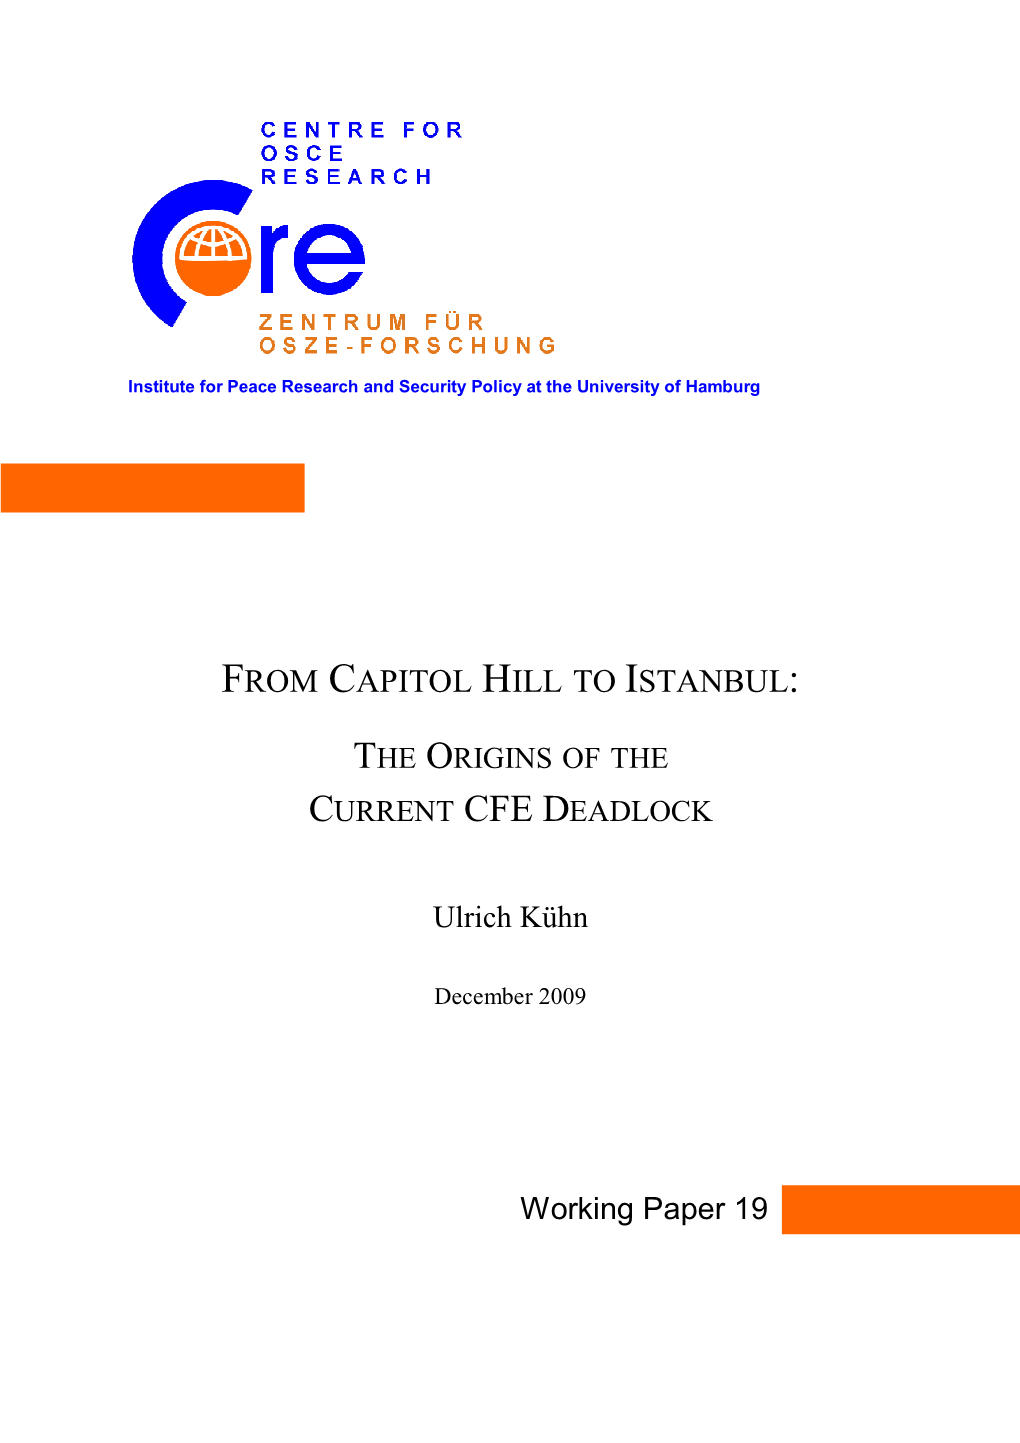 From Capitol Hill to Istanbul: the Origins of the Current CFE Deadlock